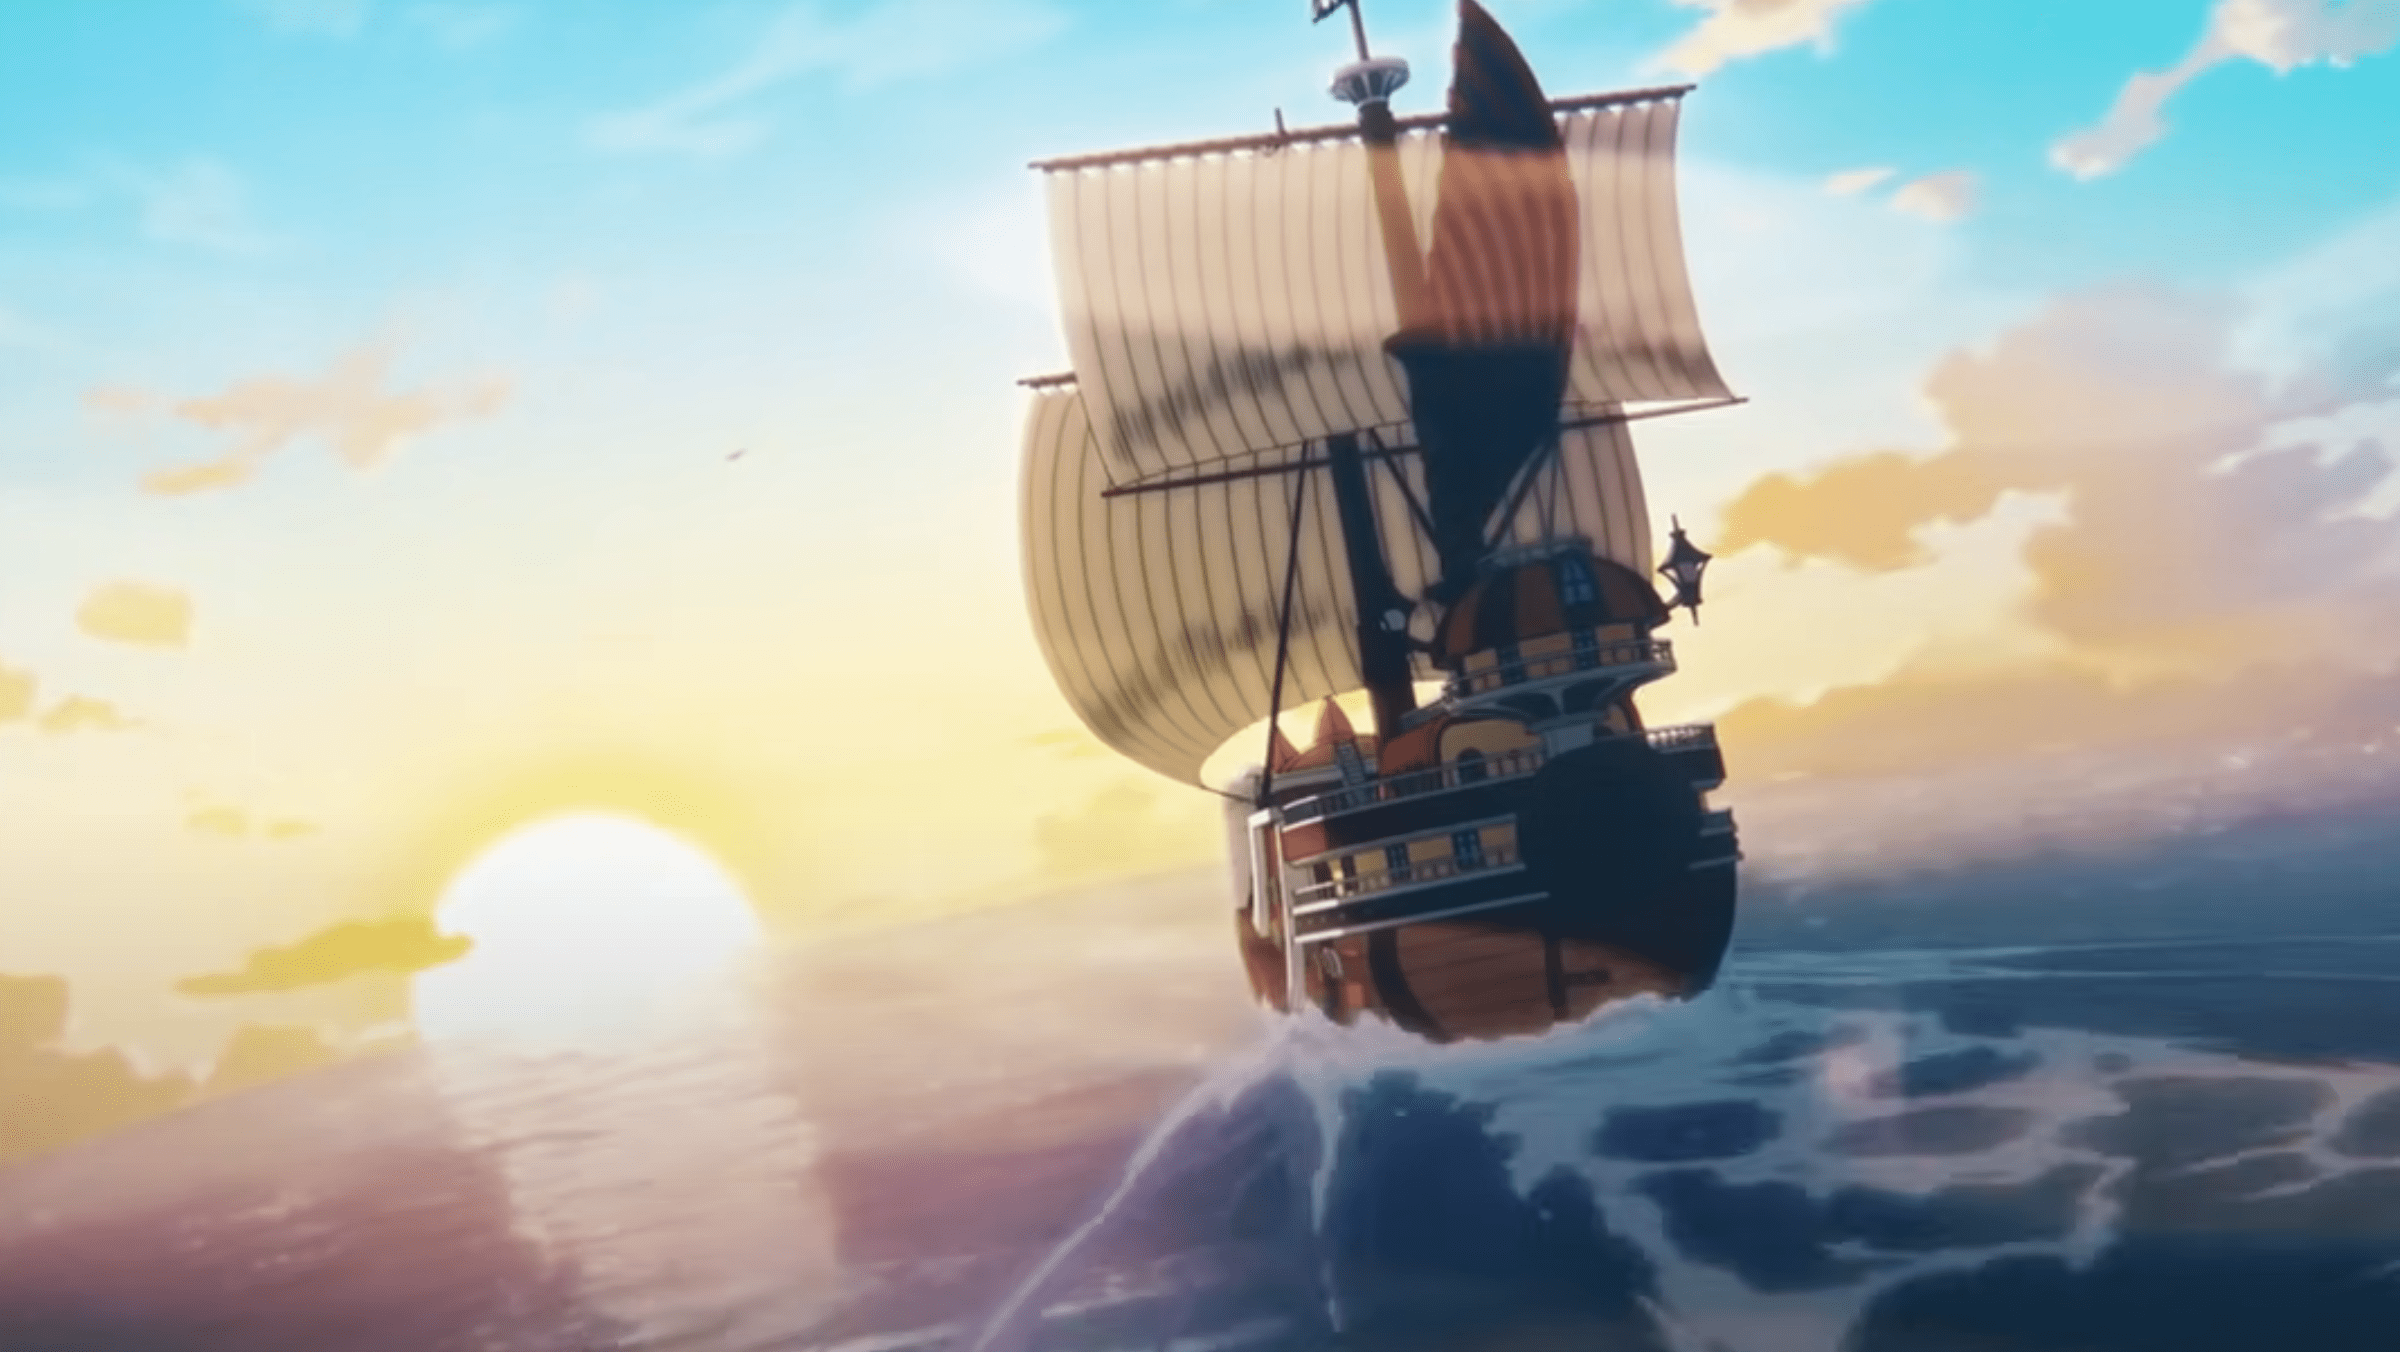 The Thousand Sunny sails off into the sunset in ending 20 of One Piece